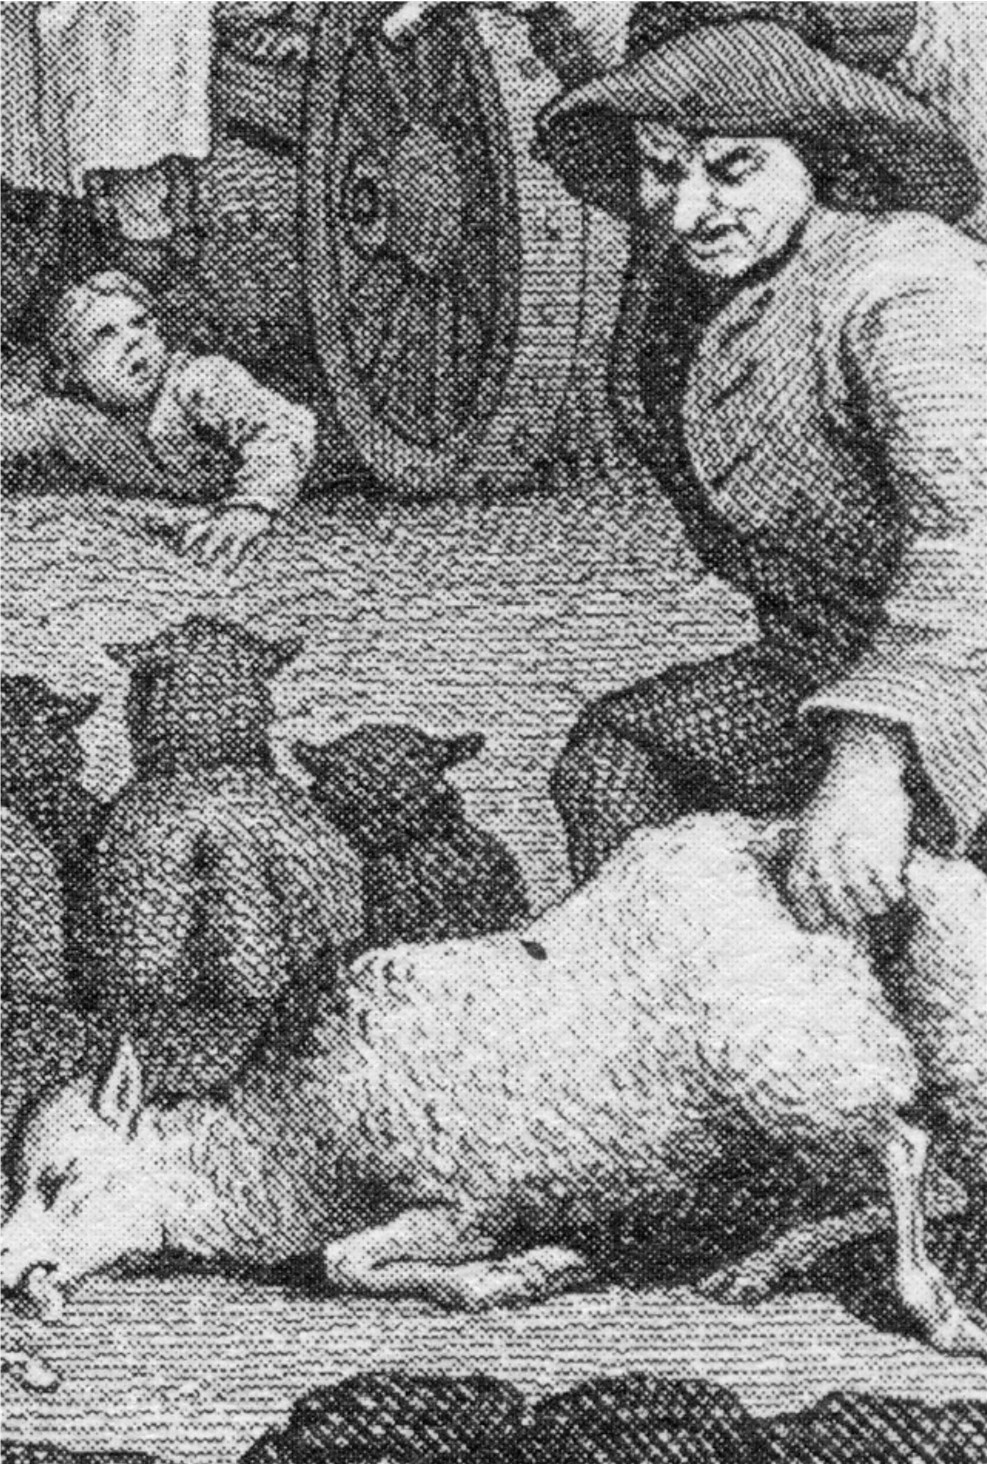 The Second Stage of Cruelty: Sheep